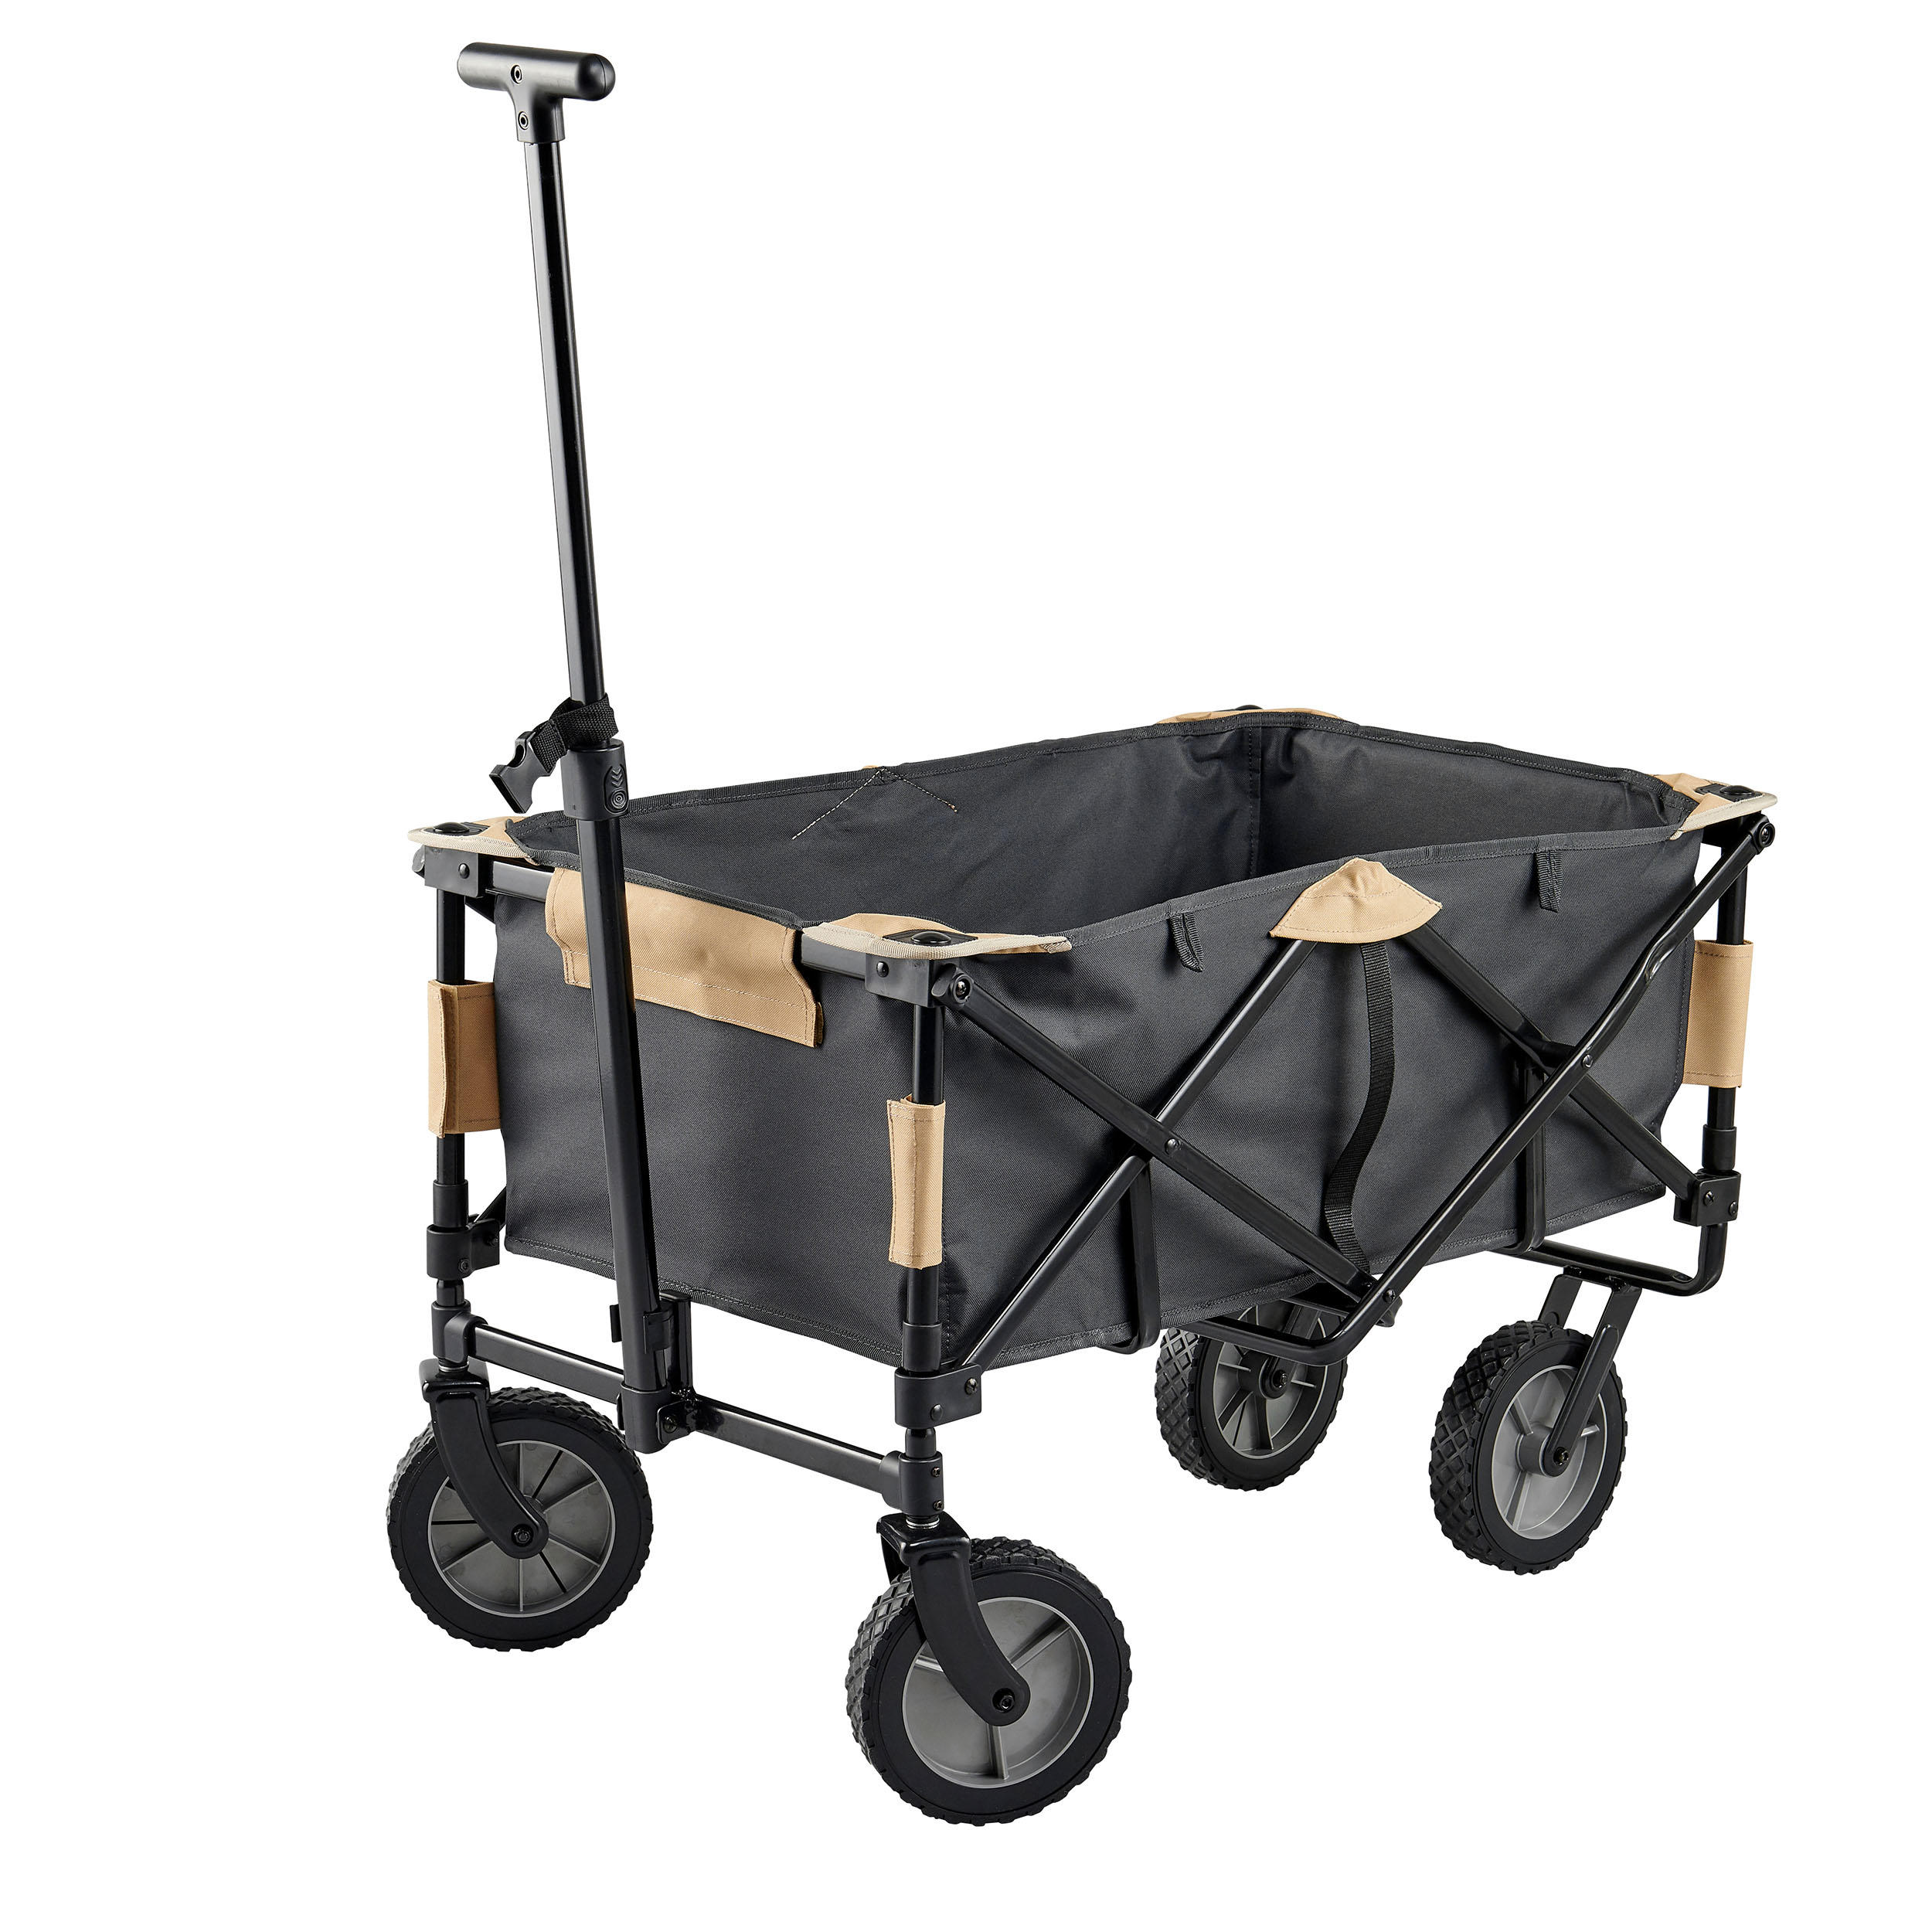 FOLDING TRANSPORT CART FOR CAMPING 